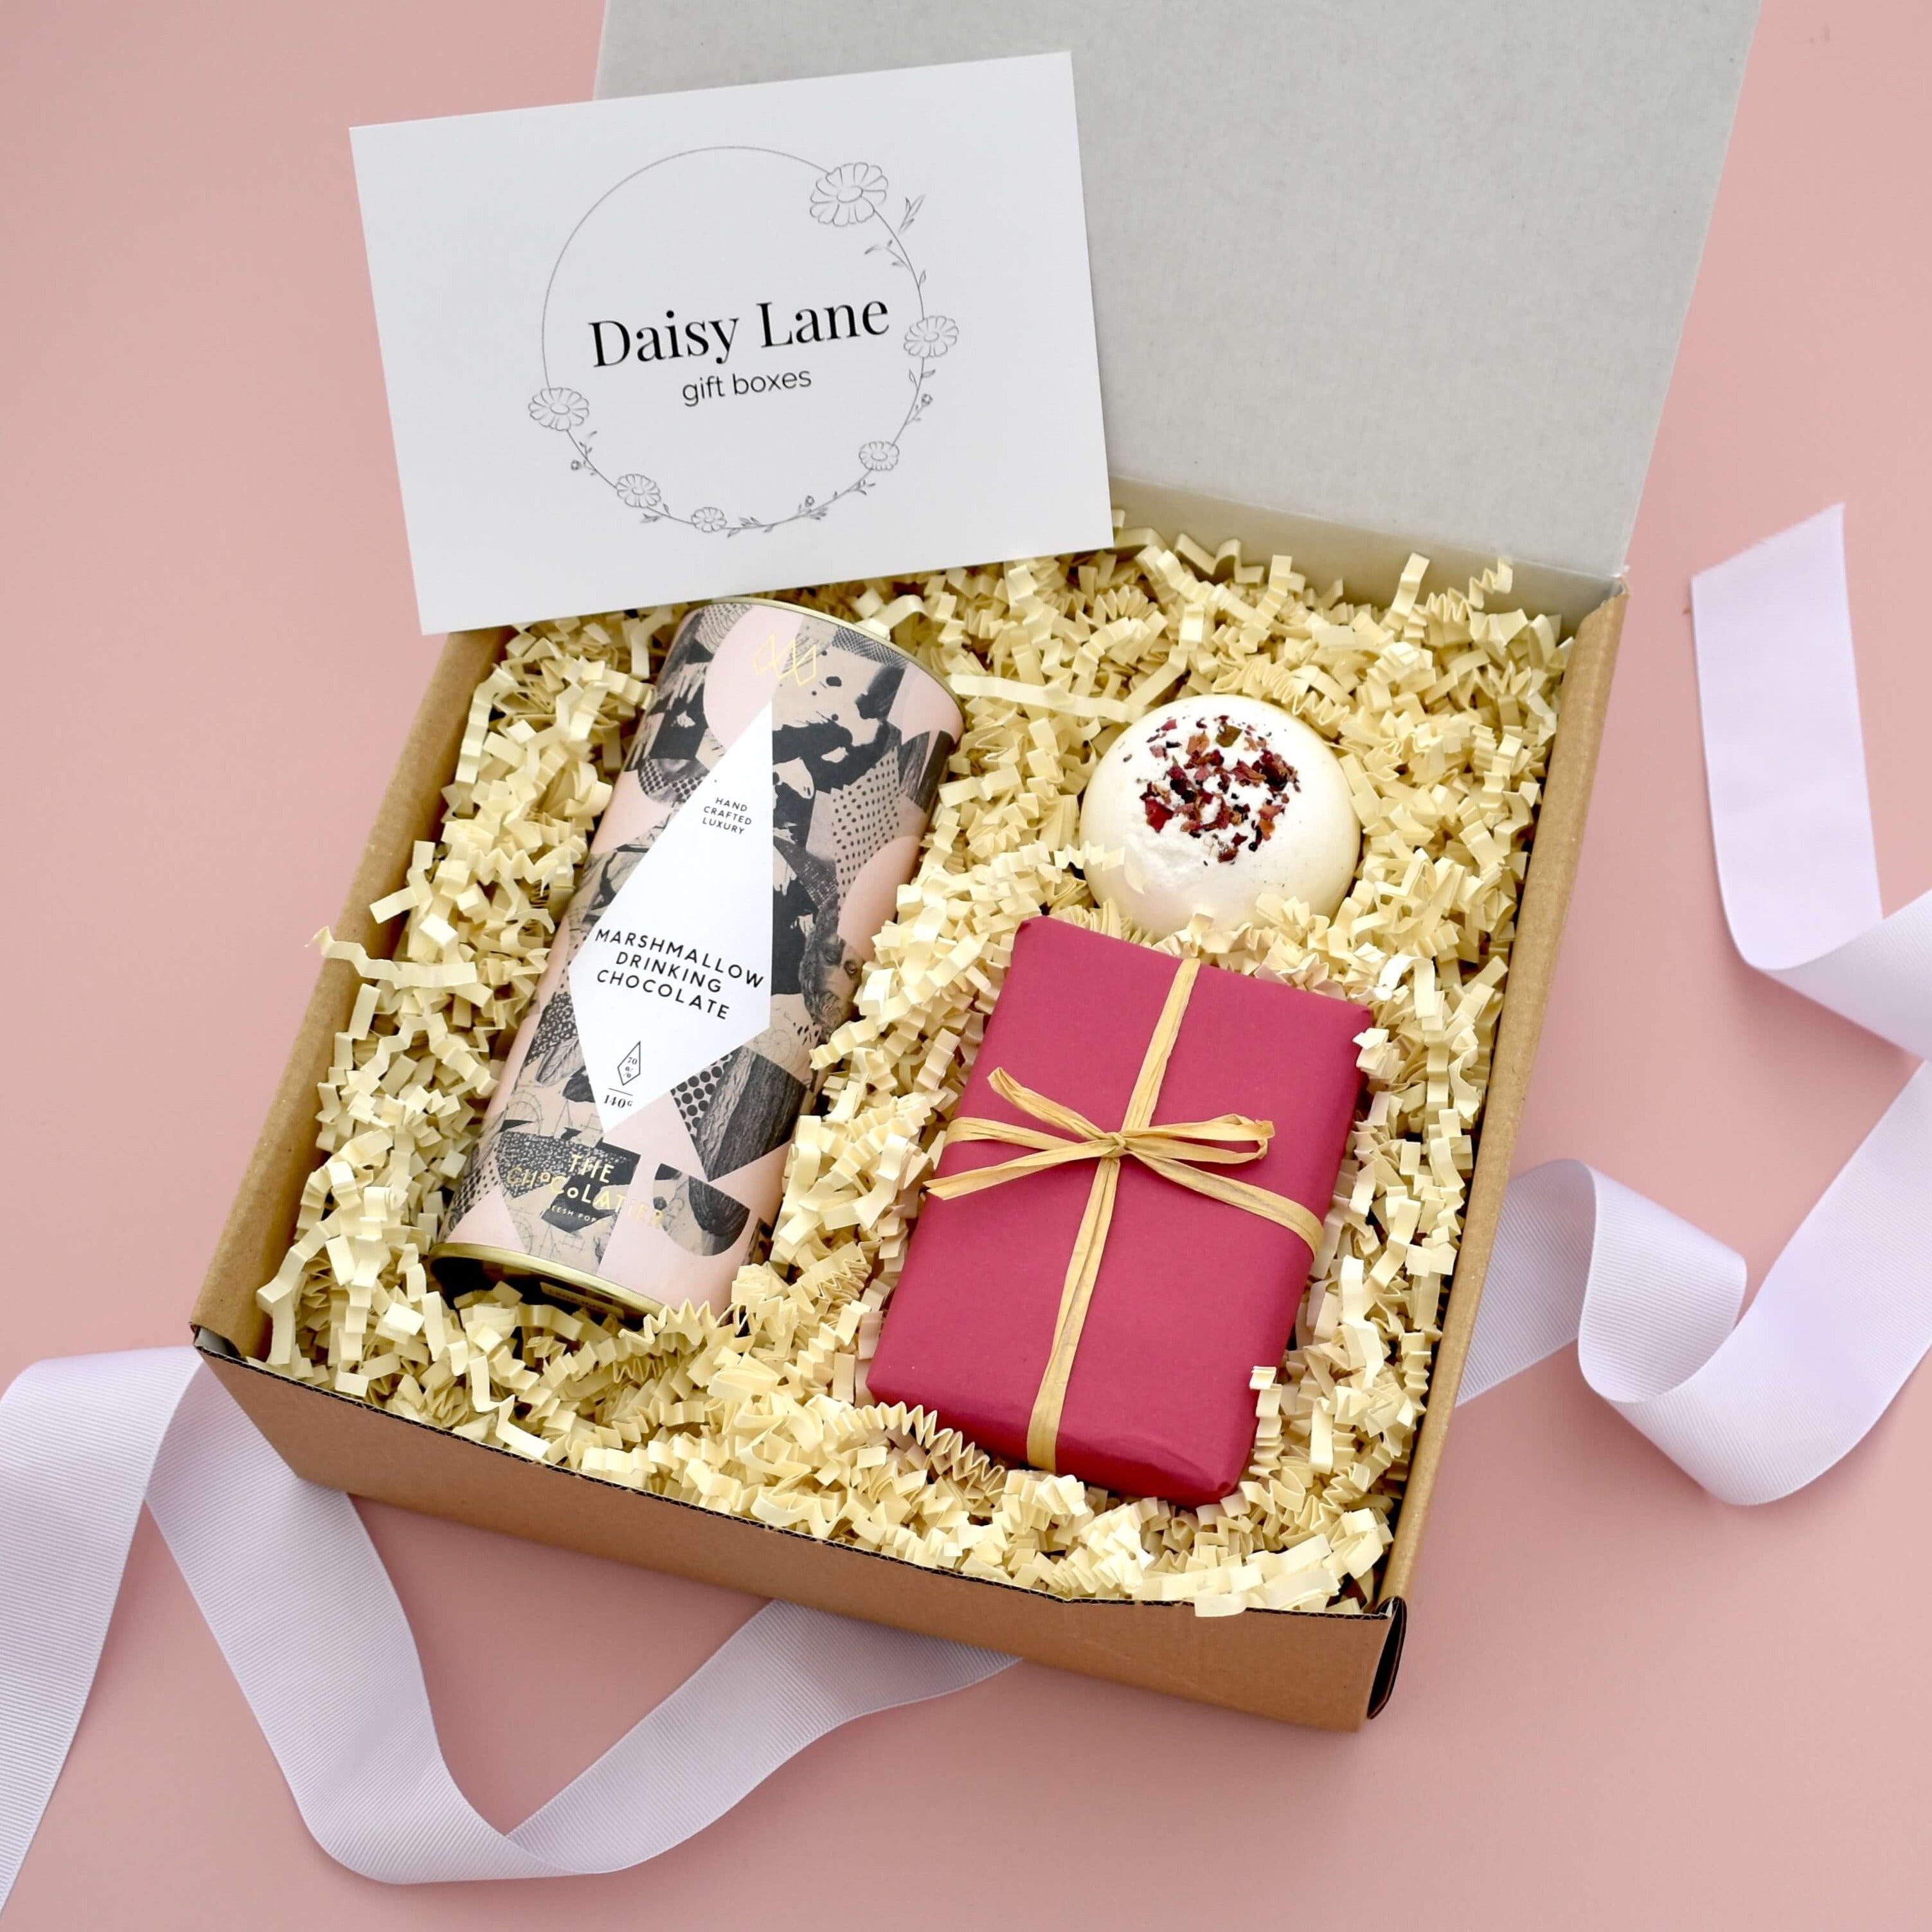 little care package gift box for her including hot chocolate shortbread floral bath bomb. Pink themed gift for her